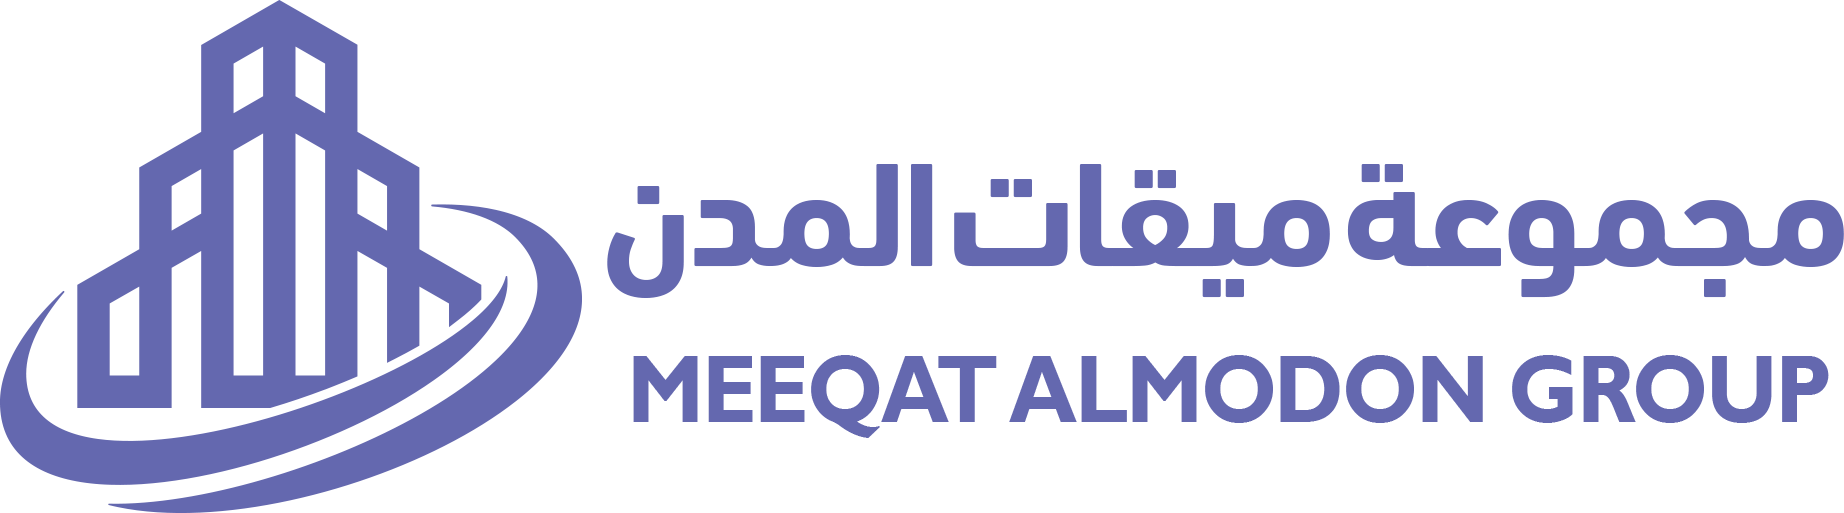 cropped-Logo-site-meeqatalmodon.png